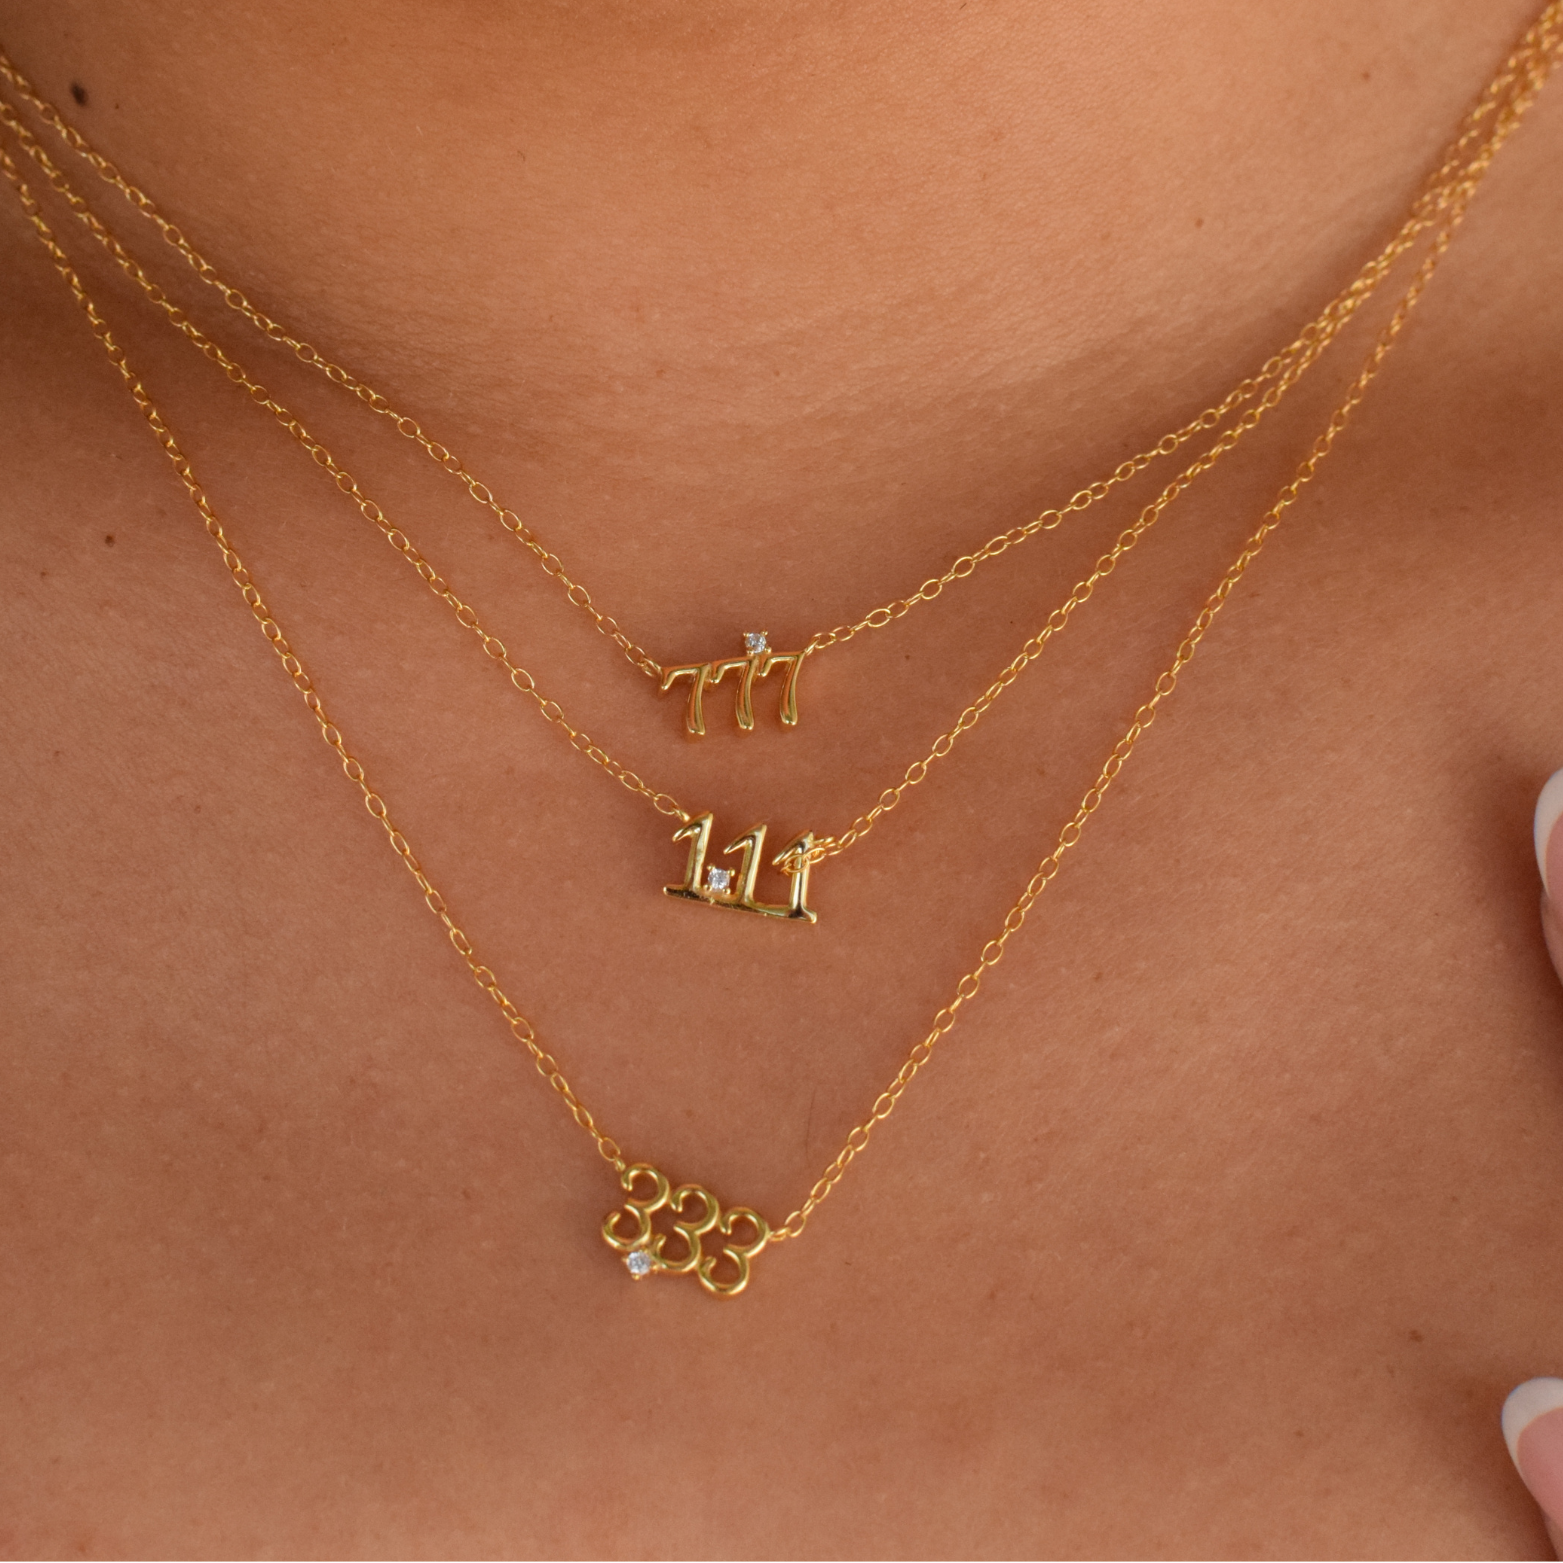 Close-up of the 111 Angel Number Necklace in 14K gold plating